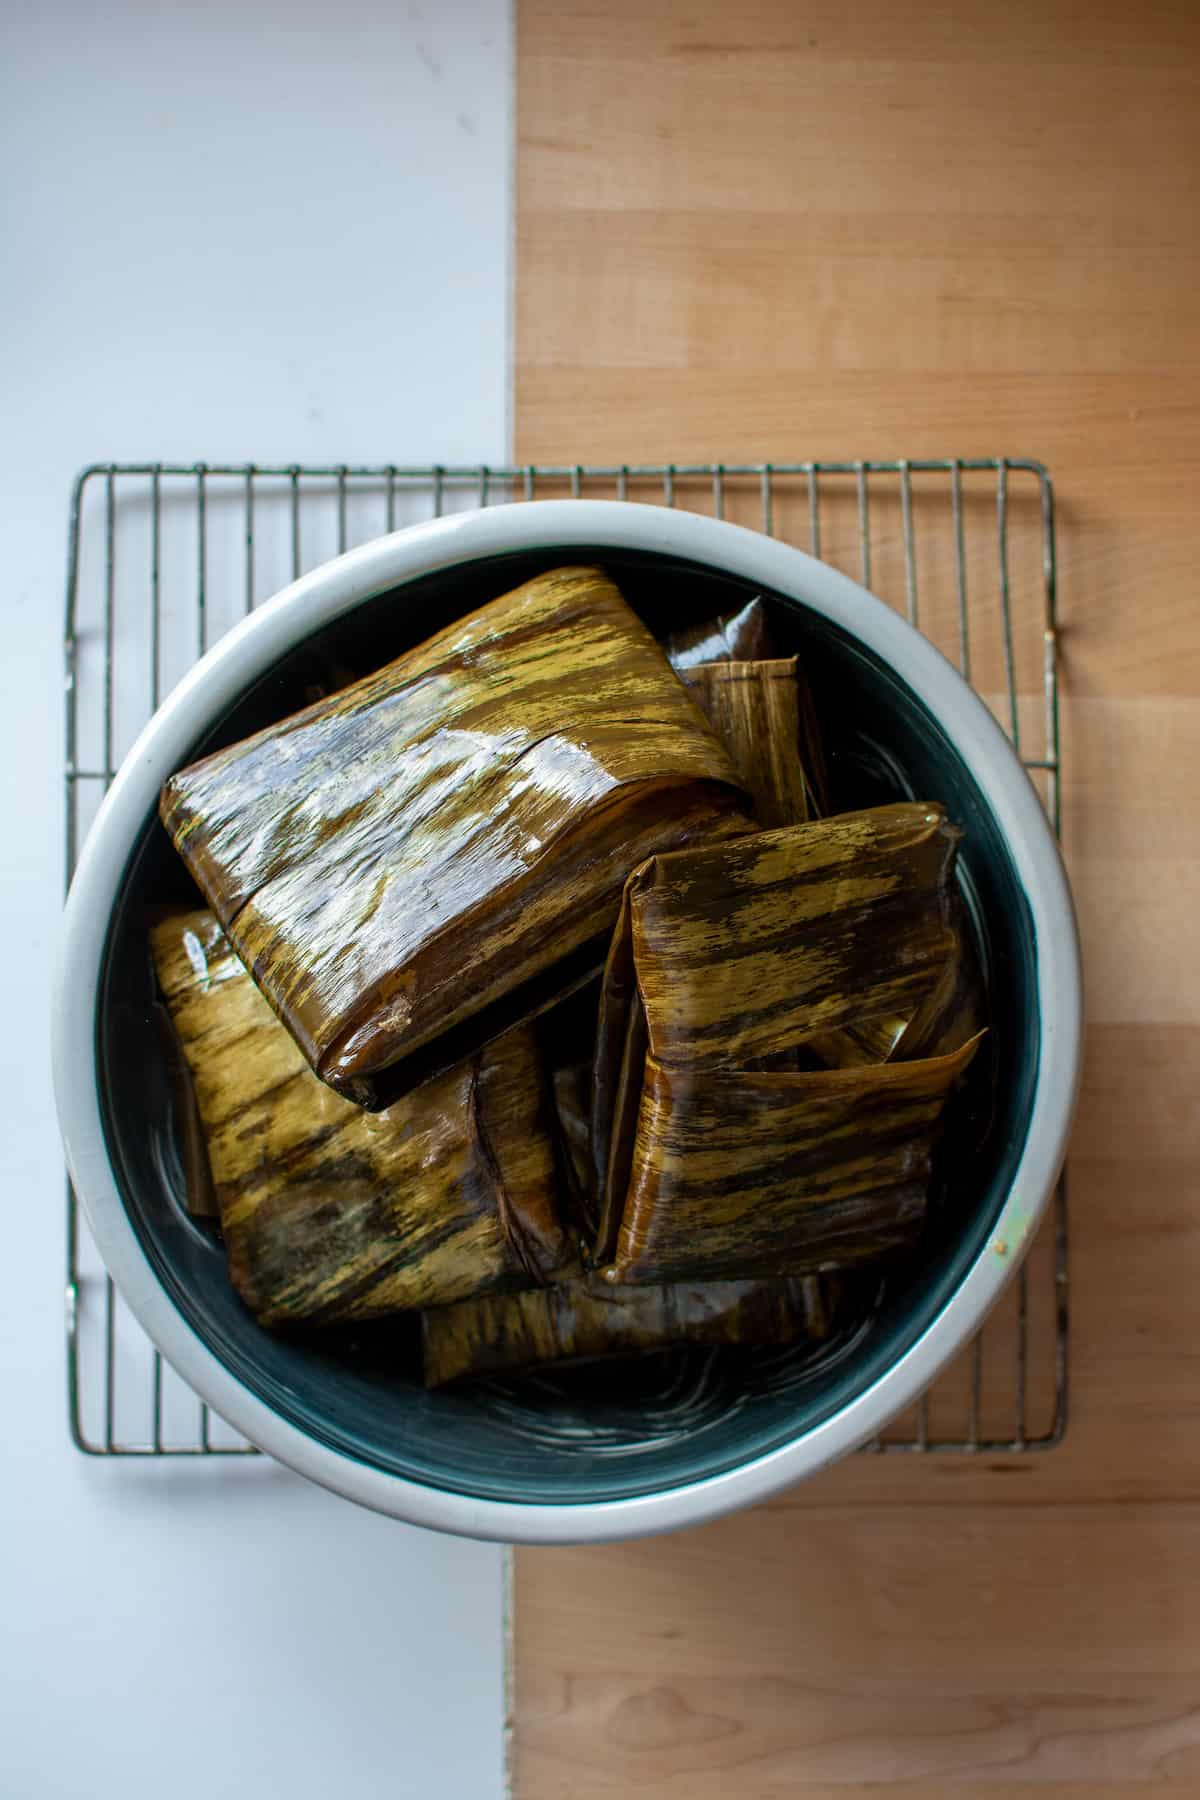 A bowl sitting on a wire rack filled with tamales wrapped in banana leaves.